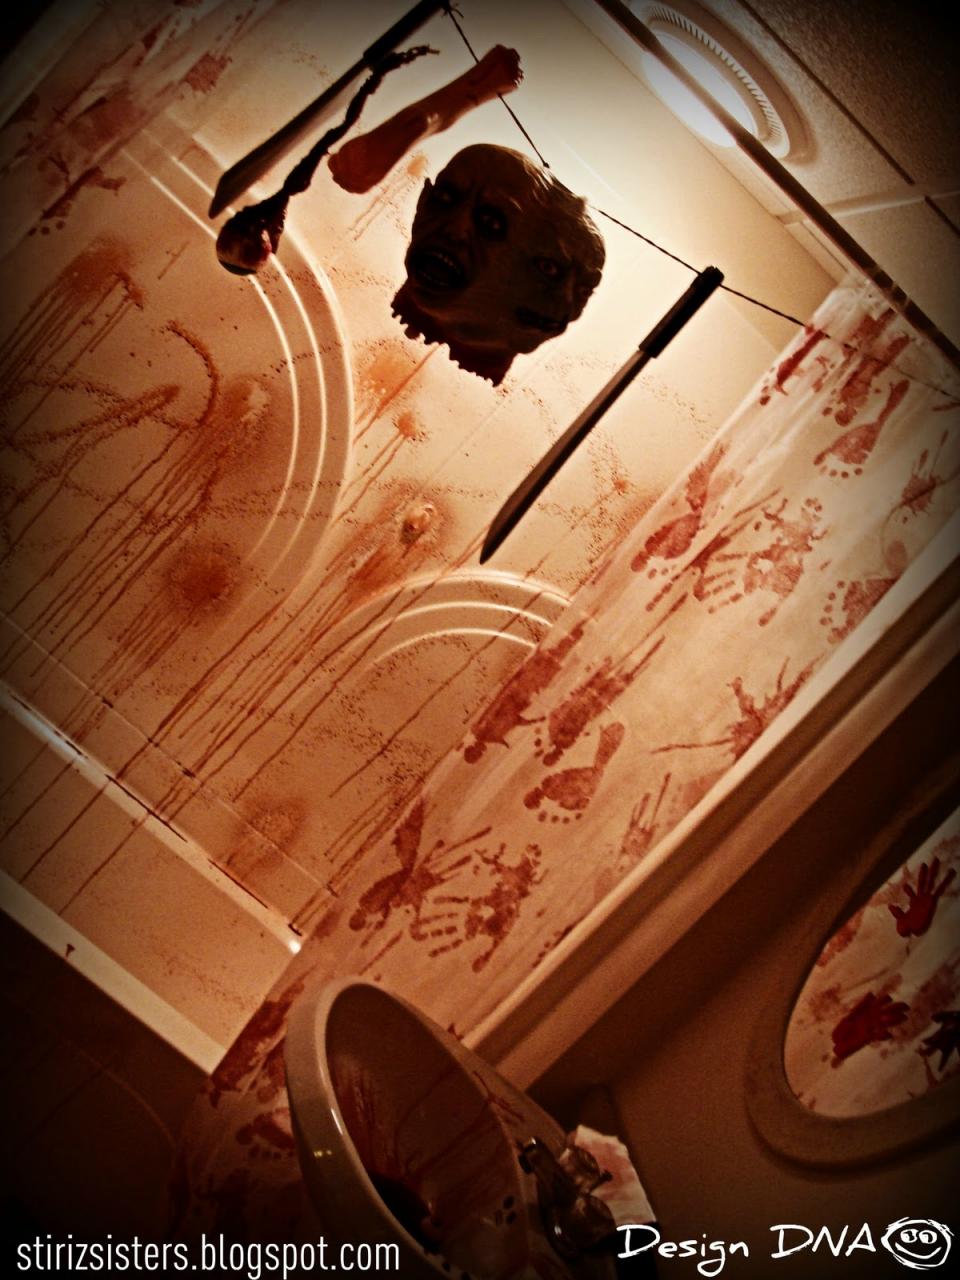 Design DNA Haunted House Rooms 4 "The Bloody Bathroom"